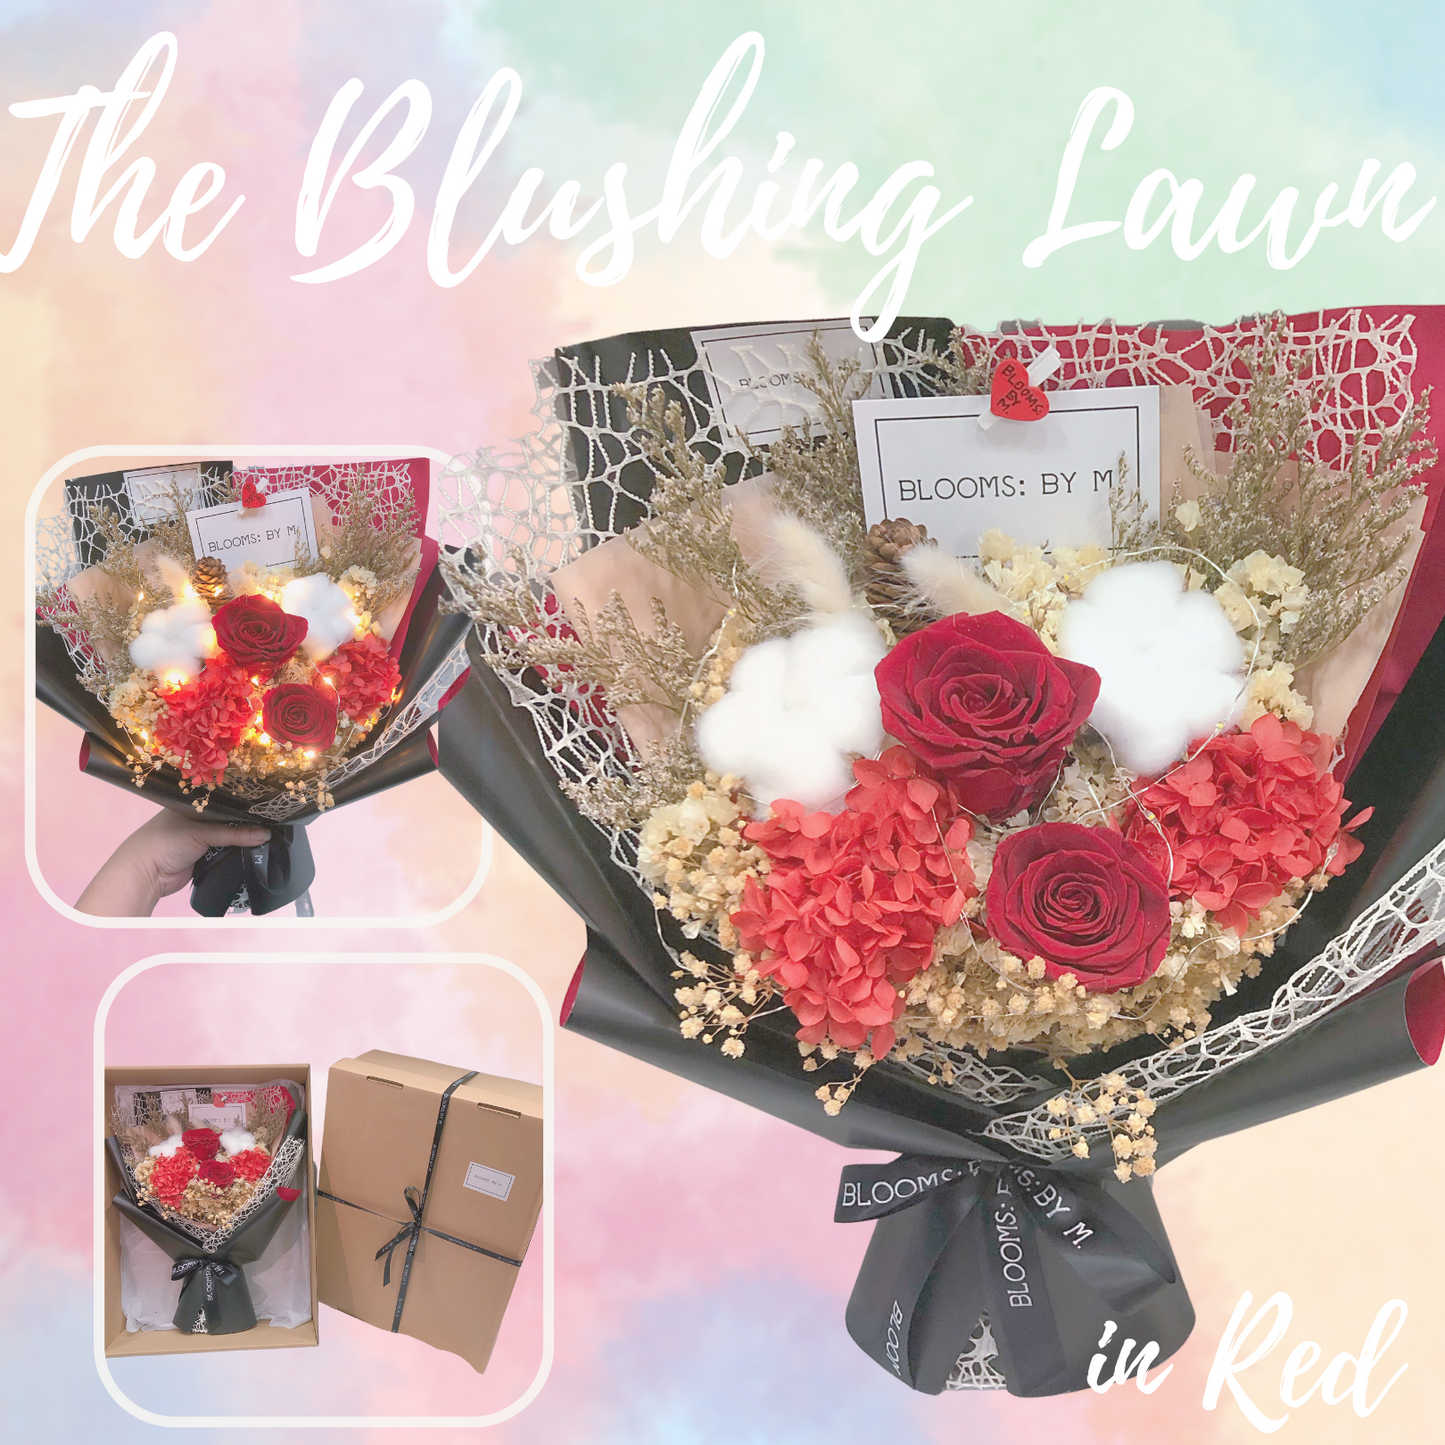 Preserved Rose Flower Bouquet Box - The Blushing Lawn (Premium) in Red